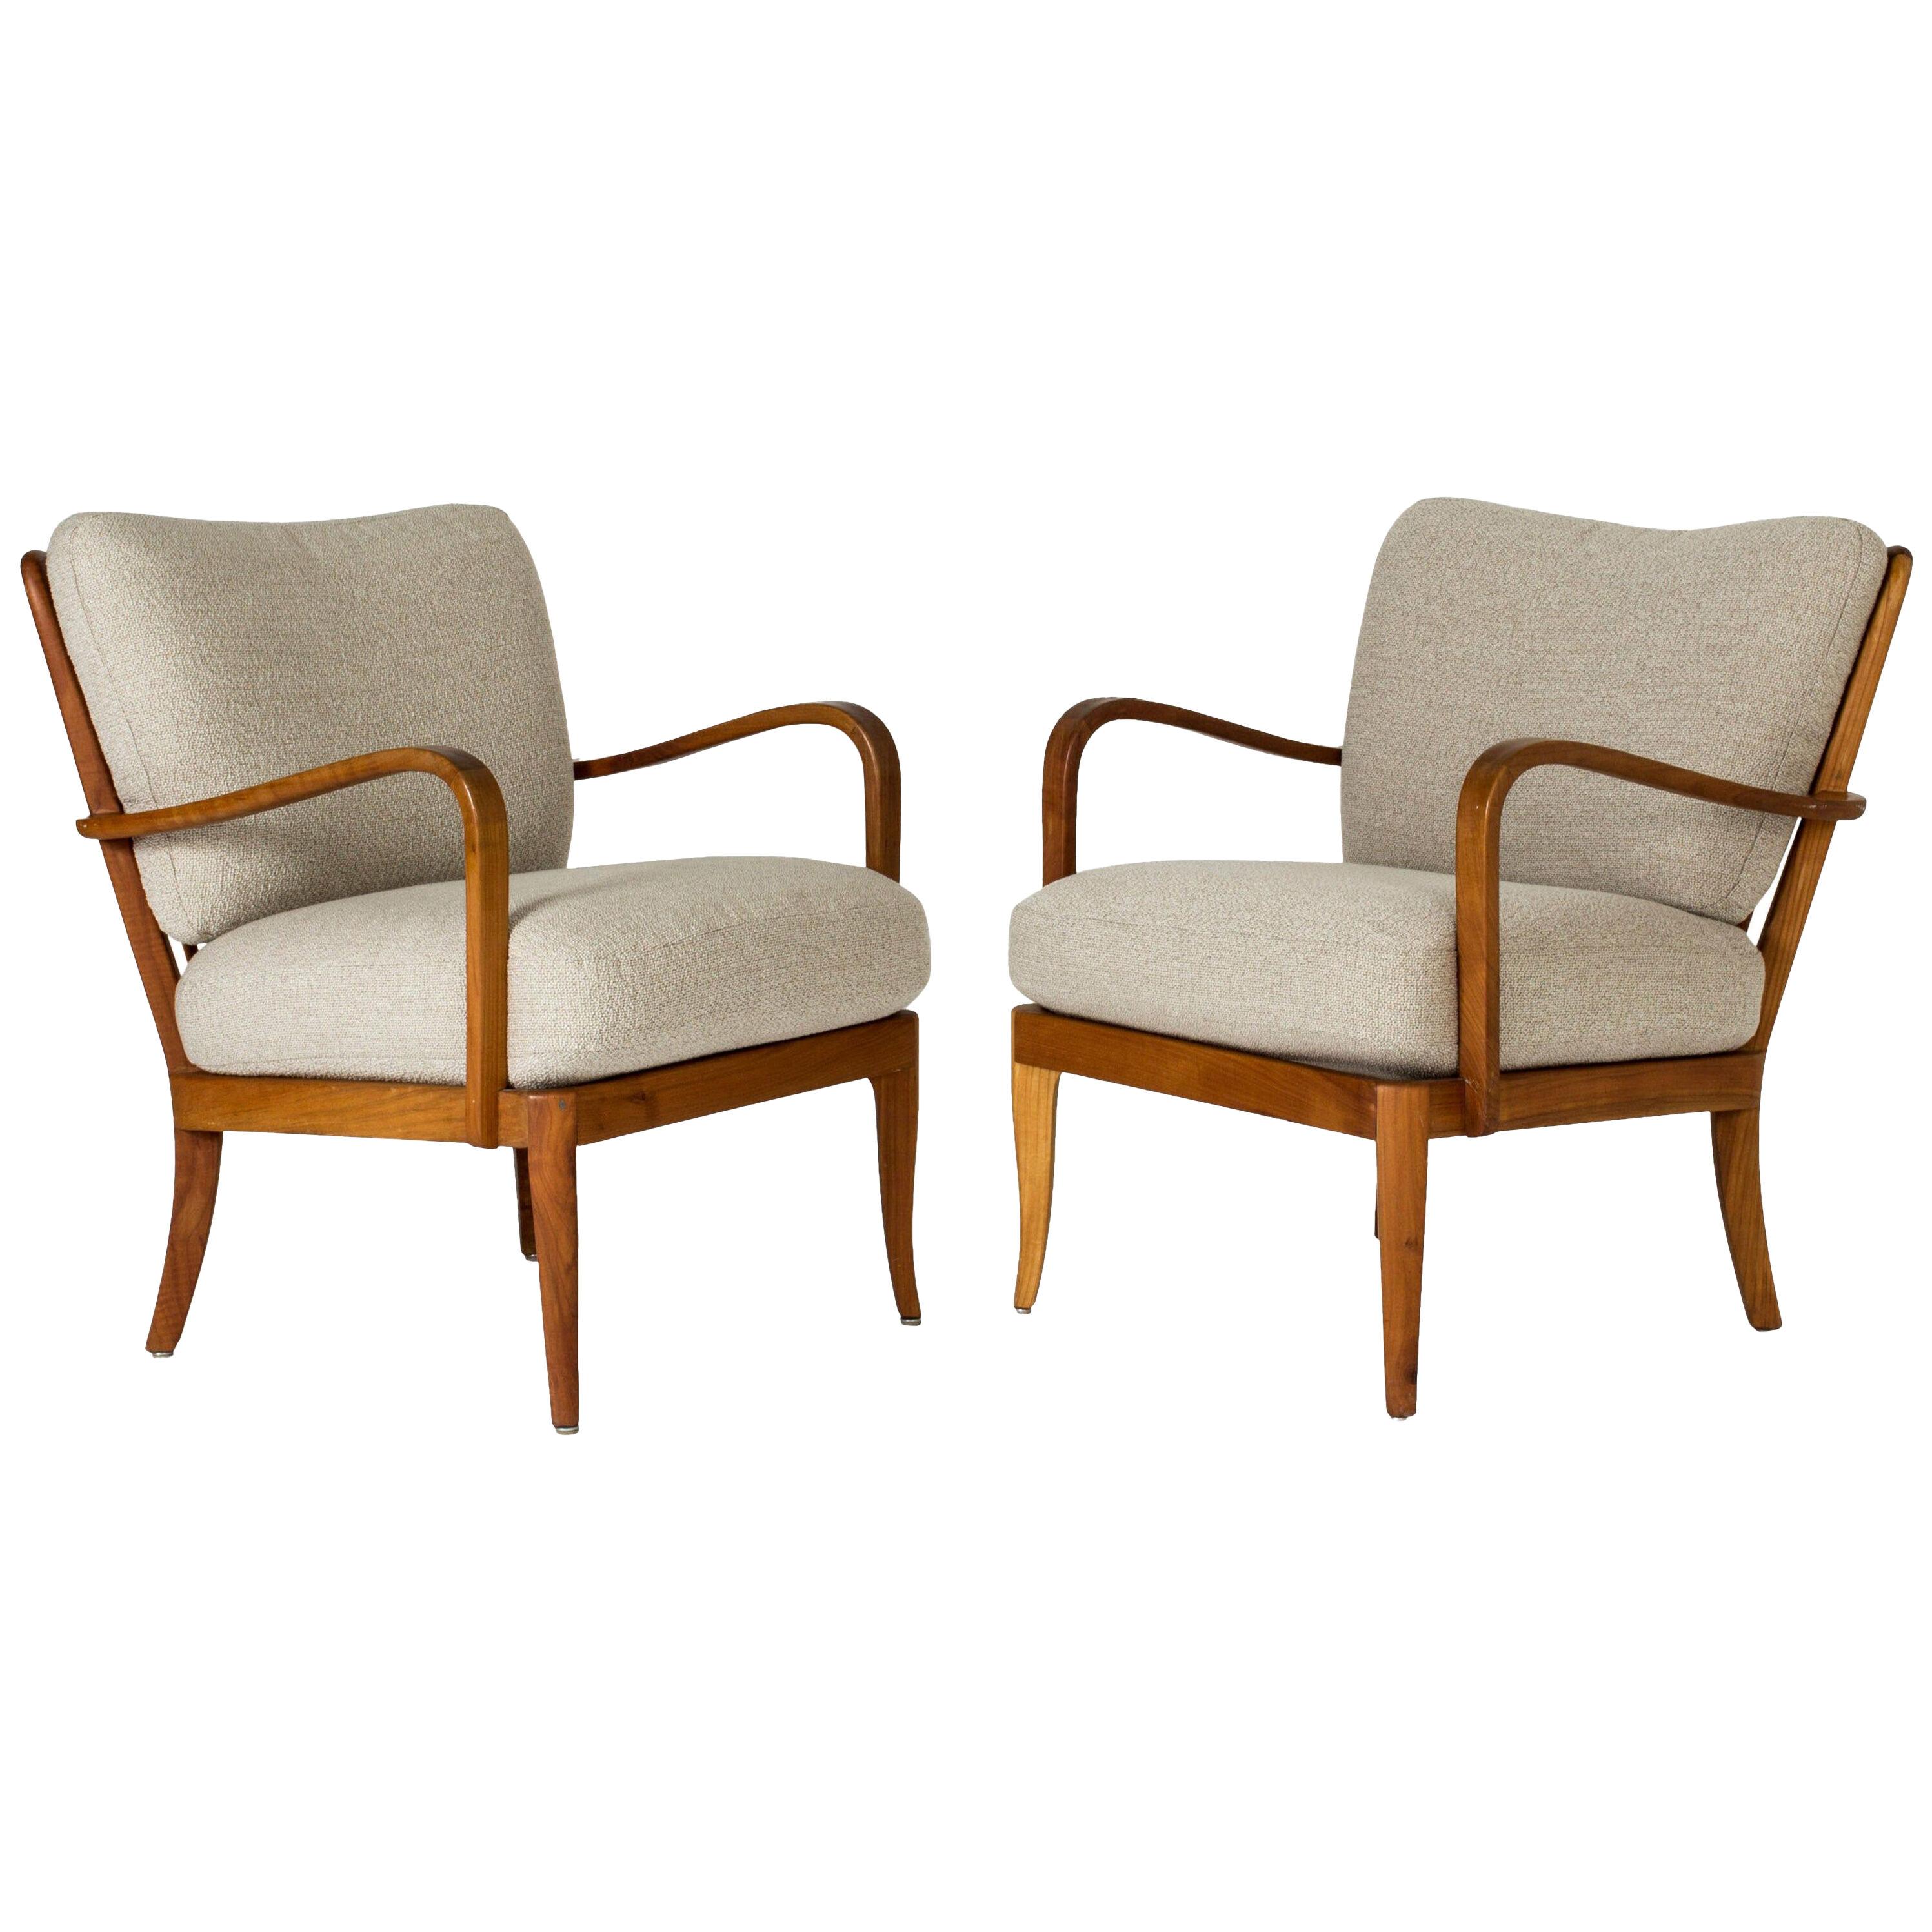 Pair of Elmwood Lounge Chairs by G.A. Berg, Sweden, 1940s